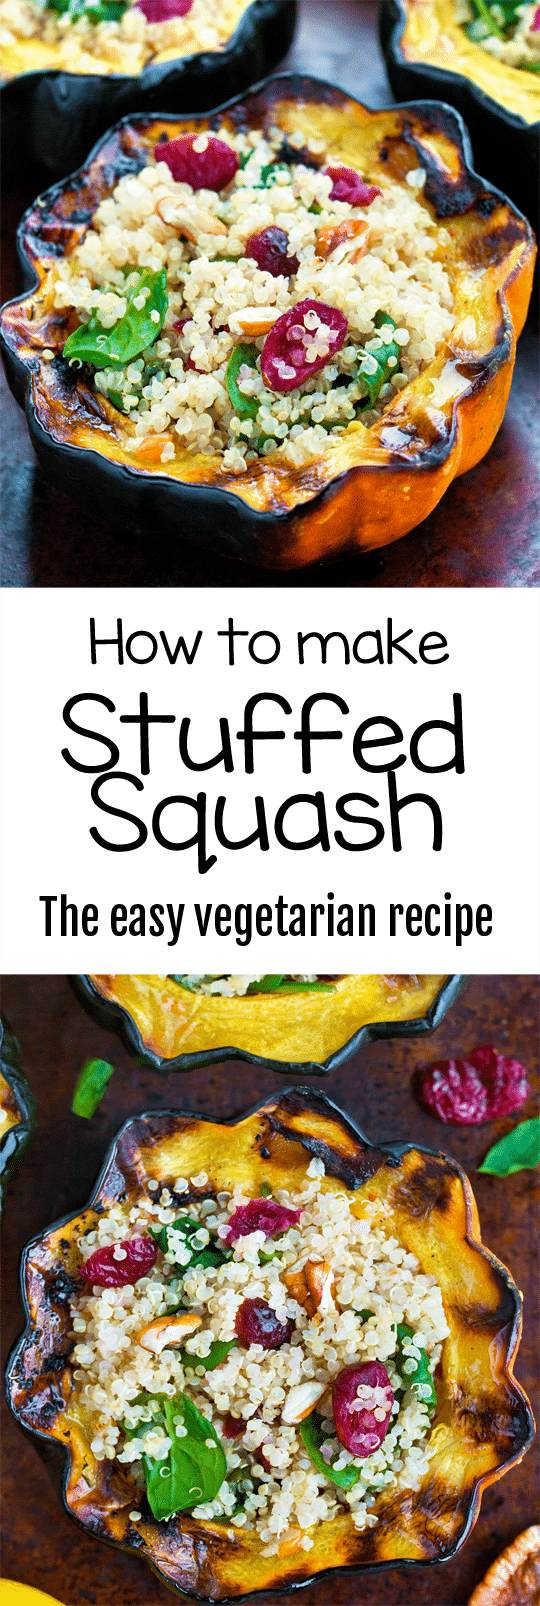 How To Make Stuffed Squash For A Healthy Dinner